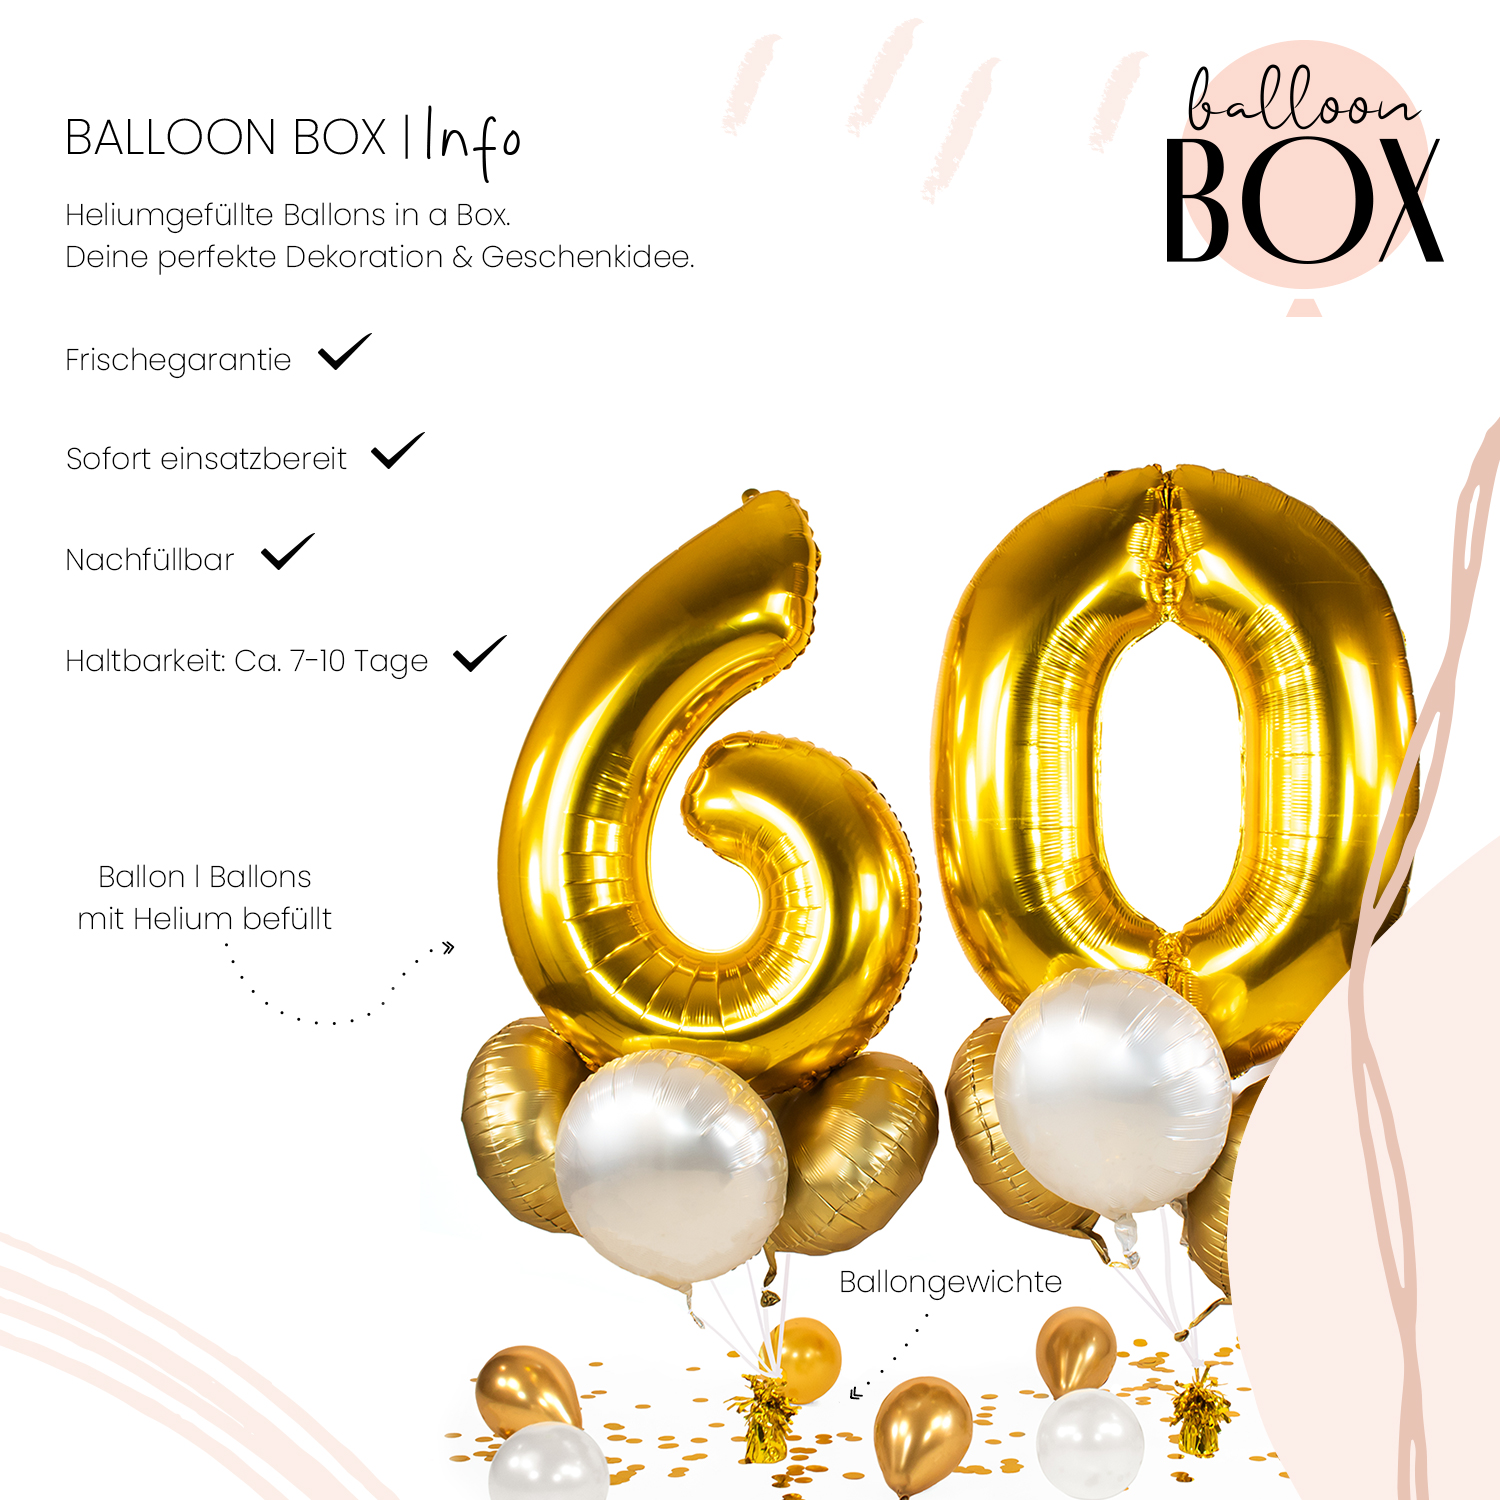 Heliumballon in a Box - Golden Sixty